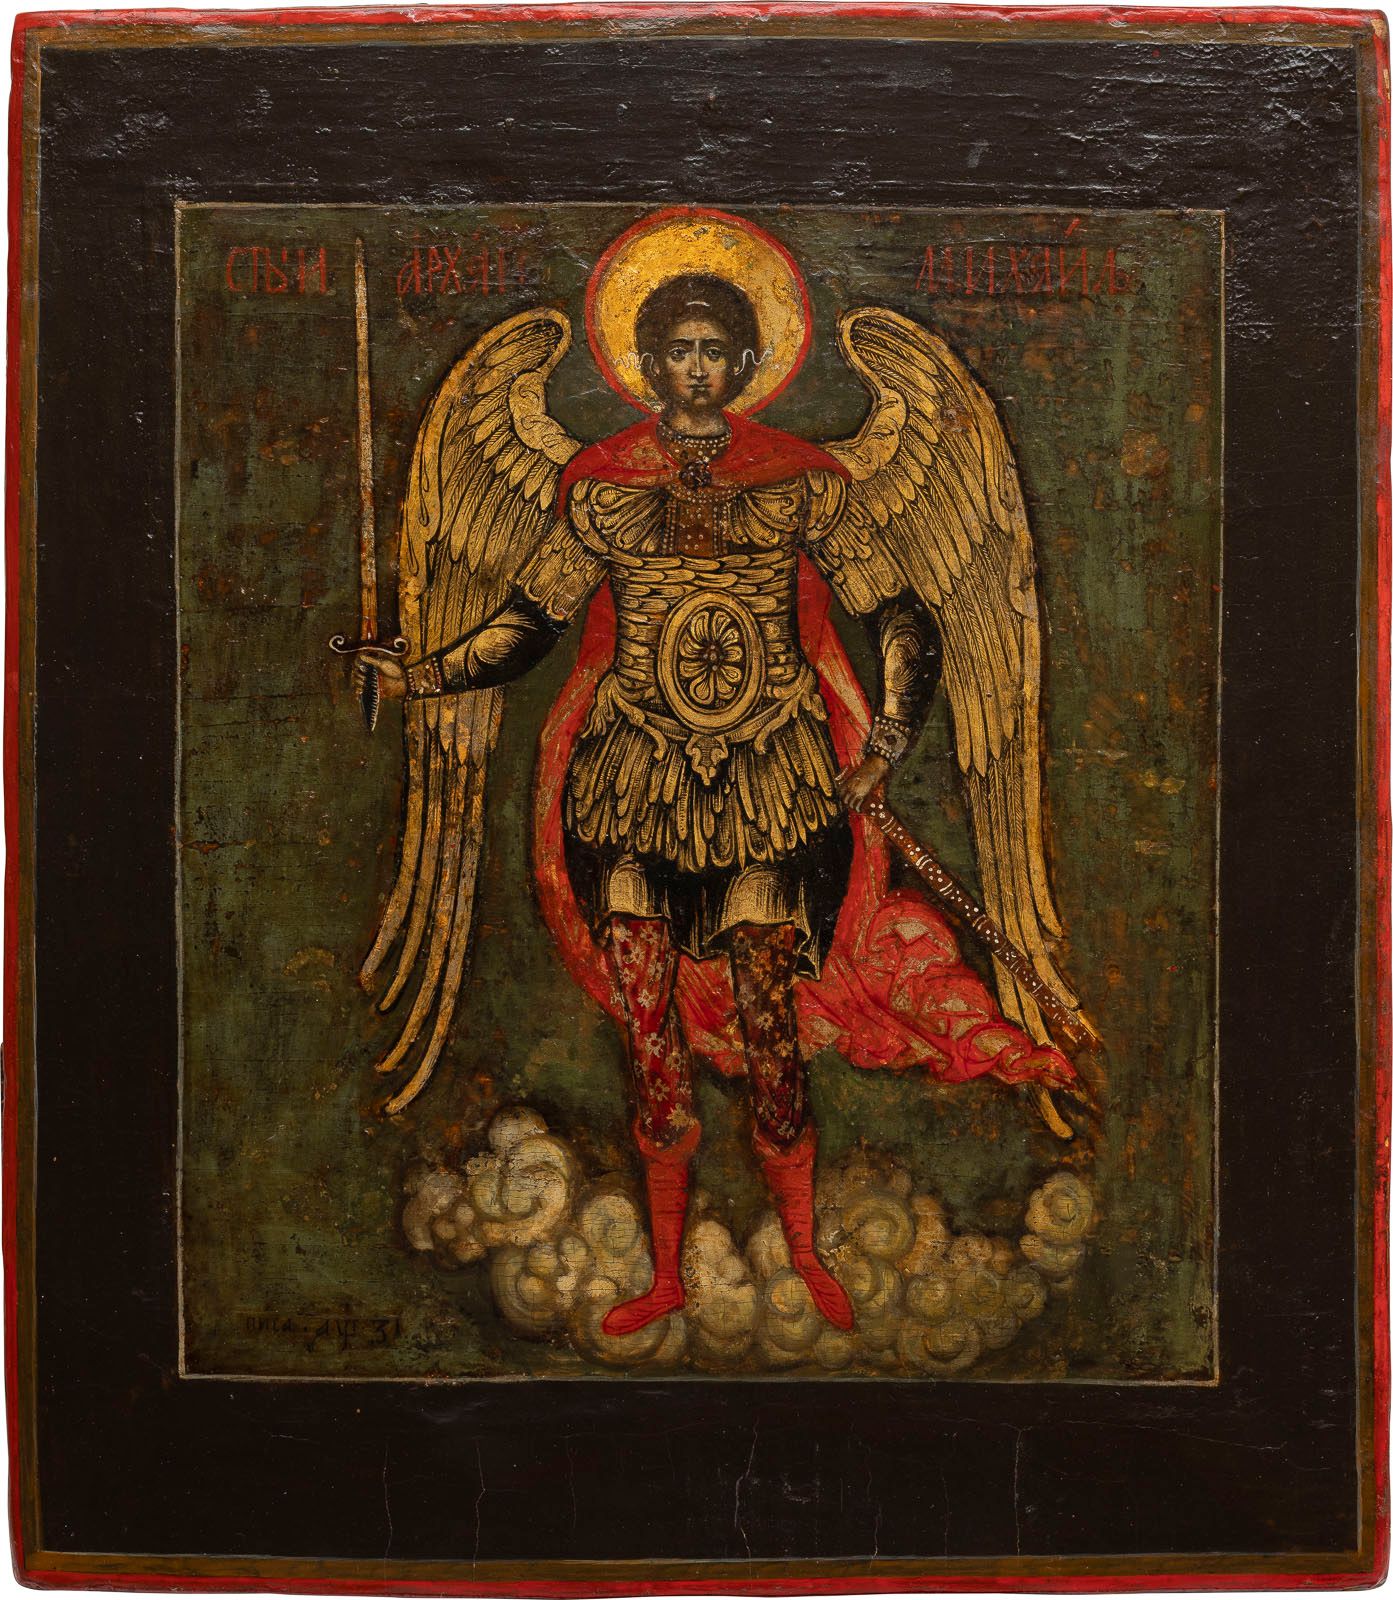 A DATED ICON SHOWING THE ARCHANGEL MICHAEL 显示米歇尔大主教的雕像 俄罗斯，日期为1717年 木板上的淡彩画。用对比强&hellip;